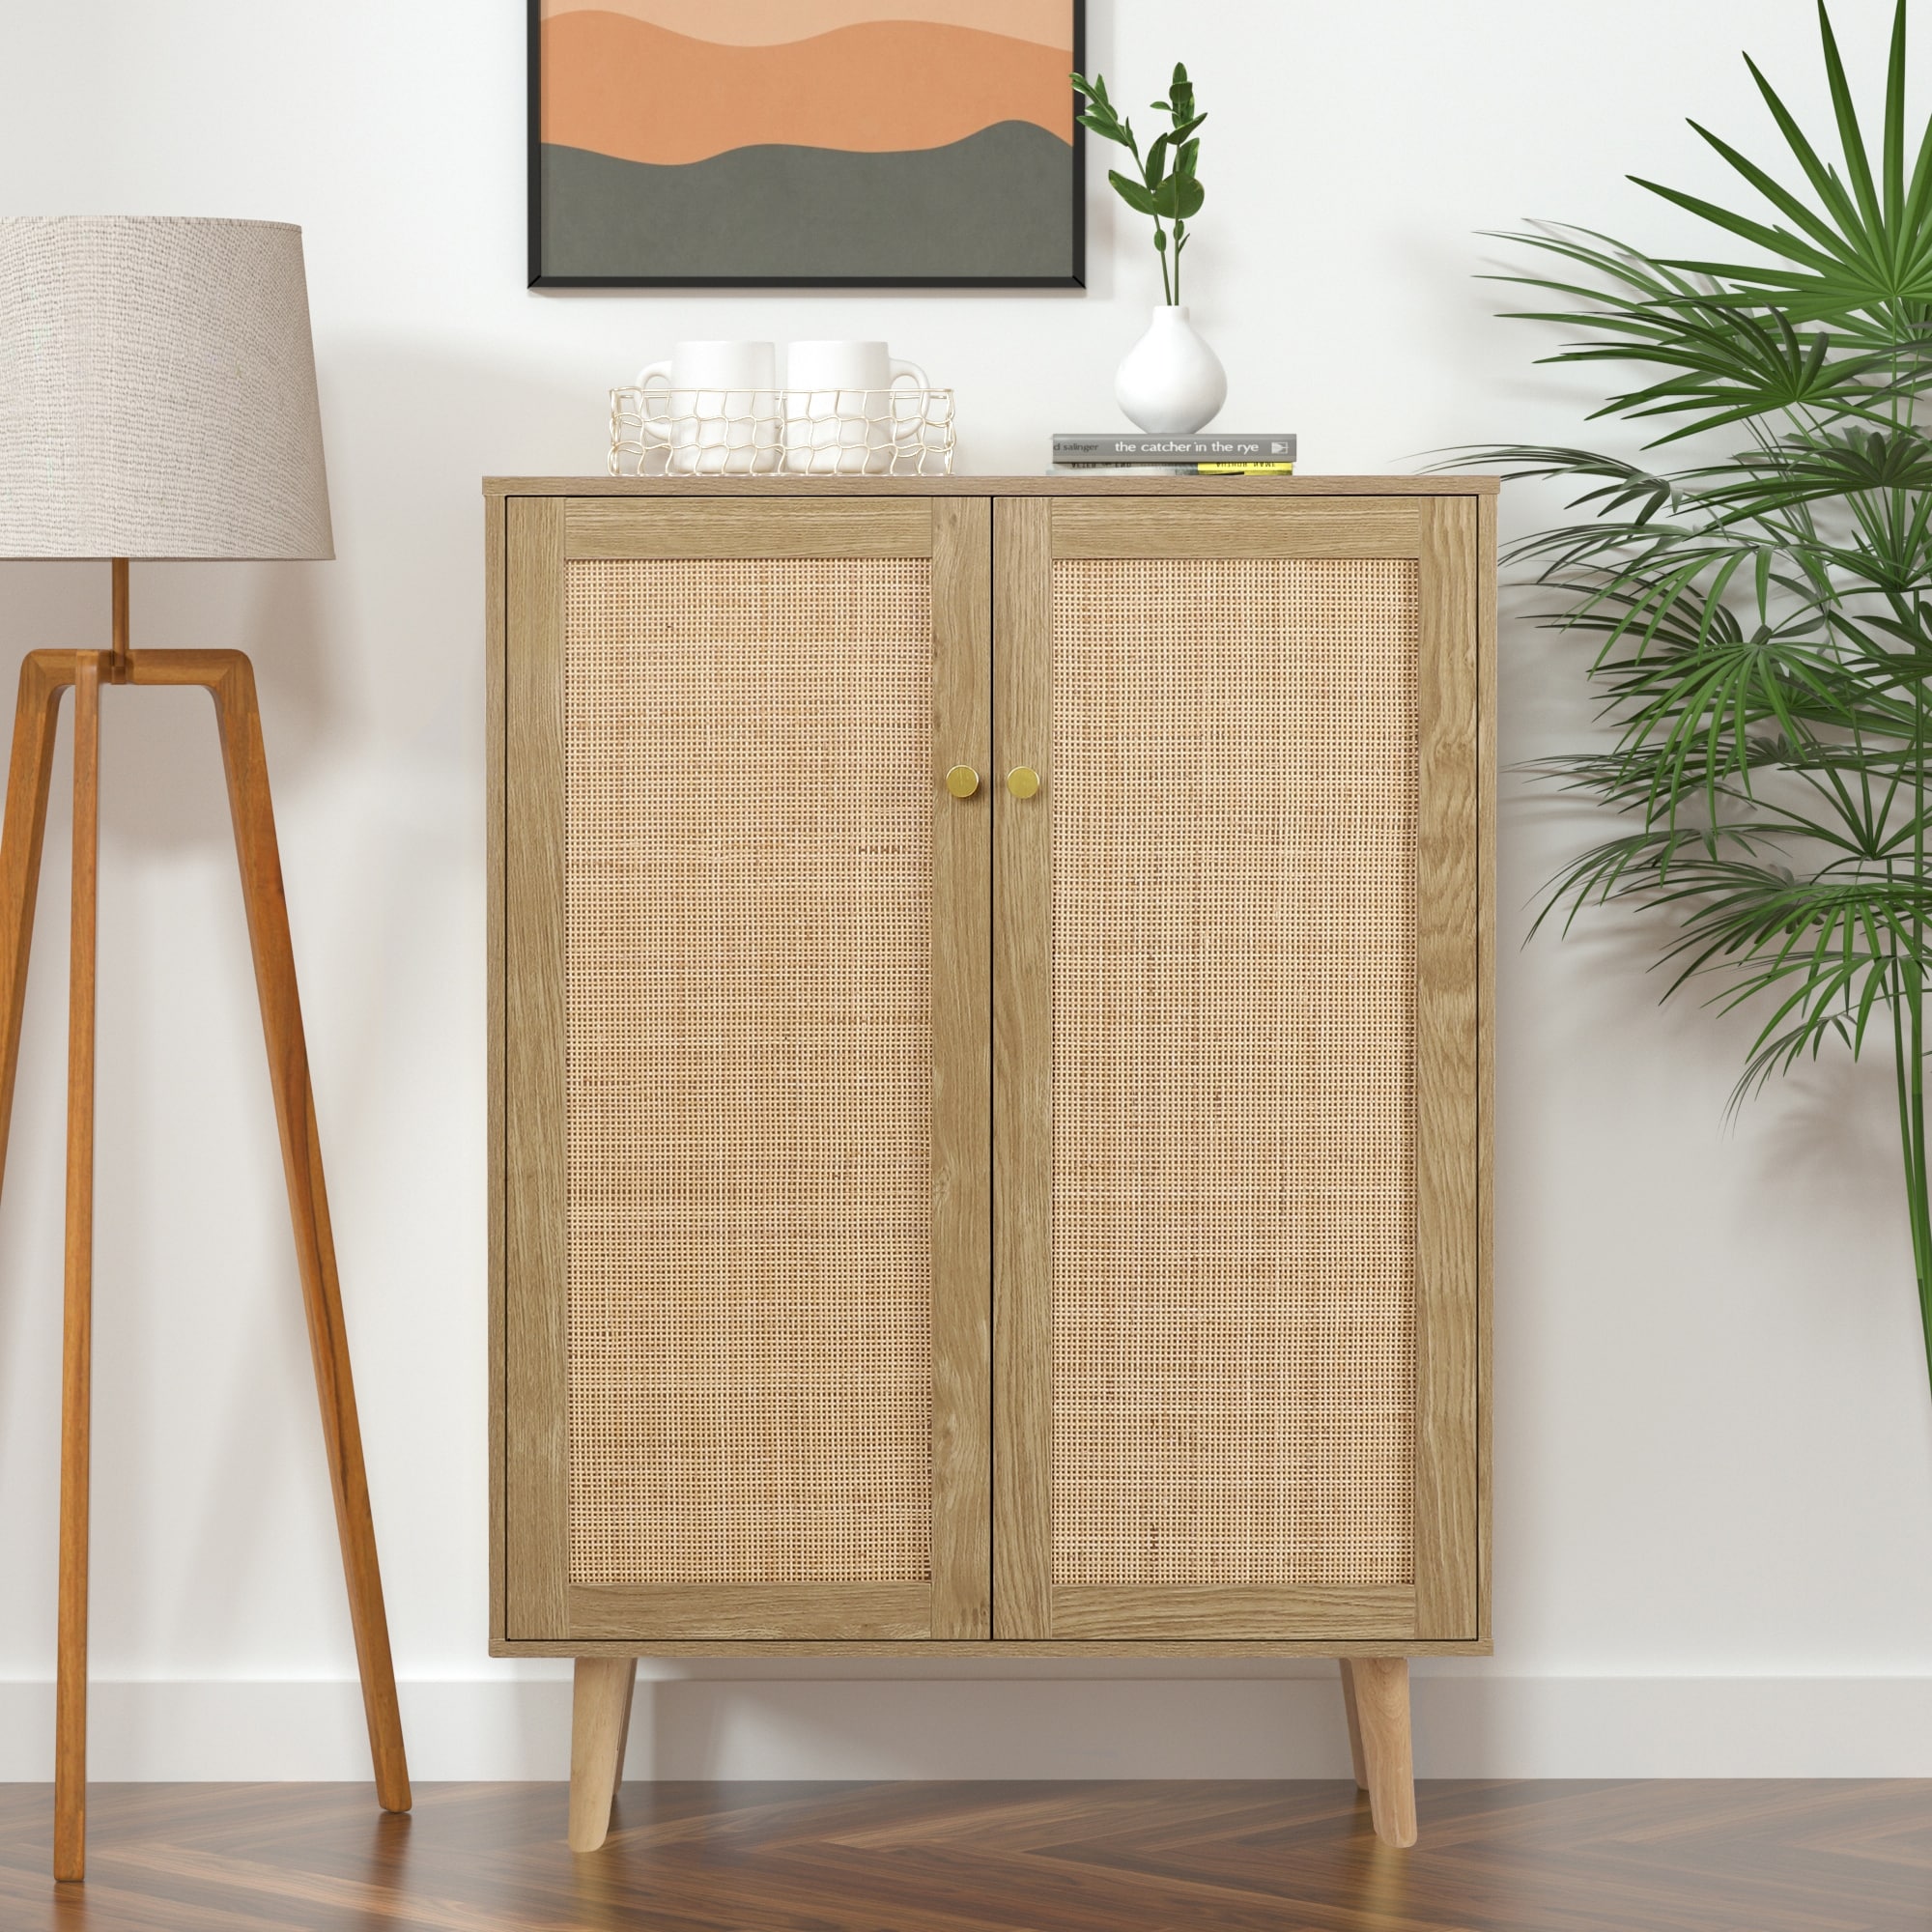 https://ak1.ostkcdn.com/images/products/is/images/direct/2fce15b3d246259354bb1417ab6a6045e806c284/Rattan-Natural-Oak-2-Doors-Accent-Storage-Cabinet-Kitchen-Buffet-Sideboard-Cabinet-for-Entryway-With-Adjustable-Shelf.jpg